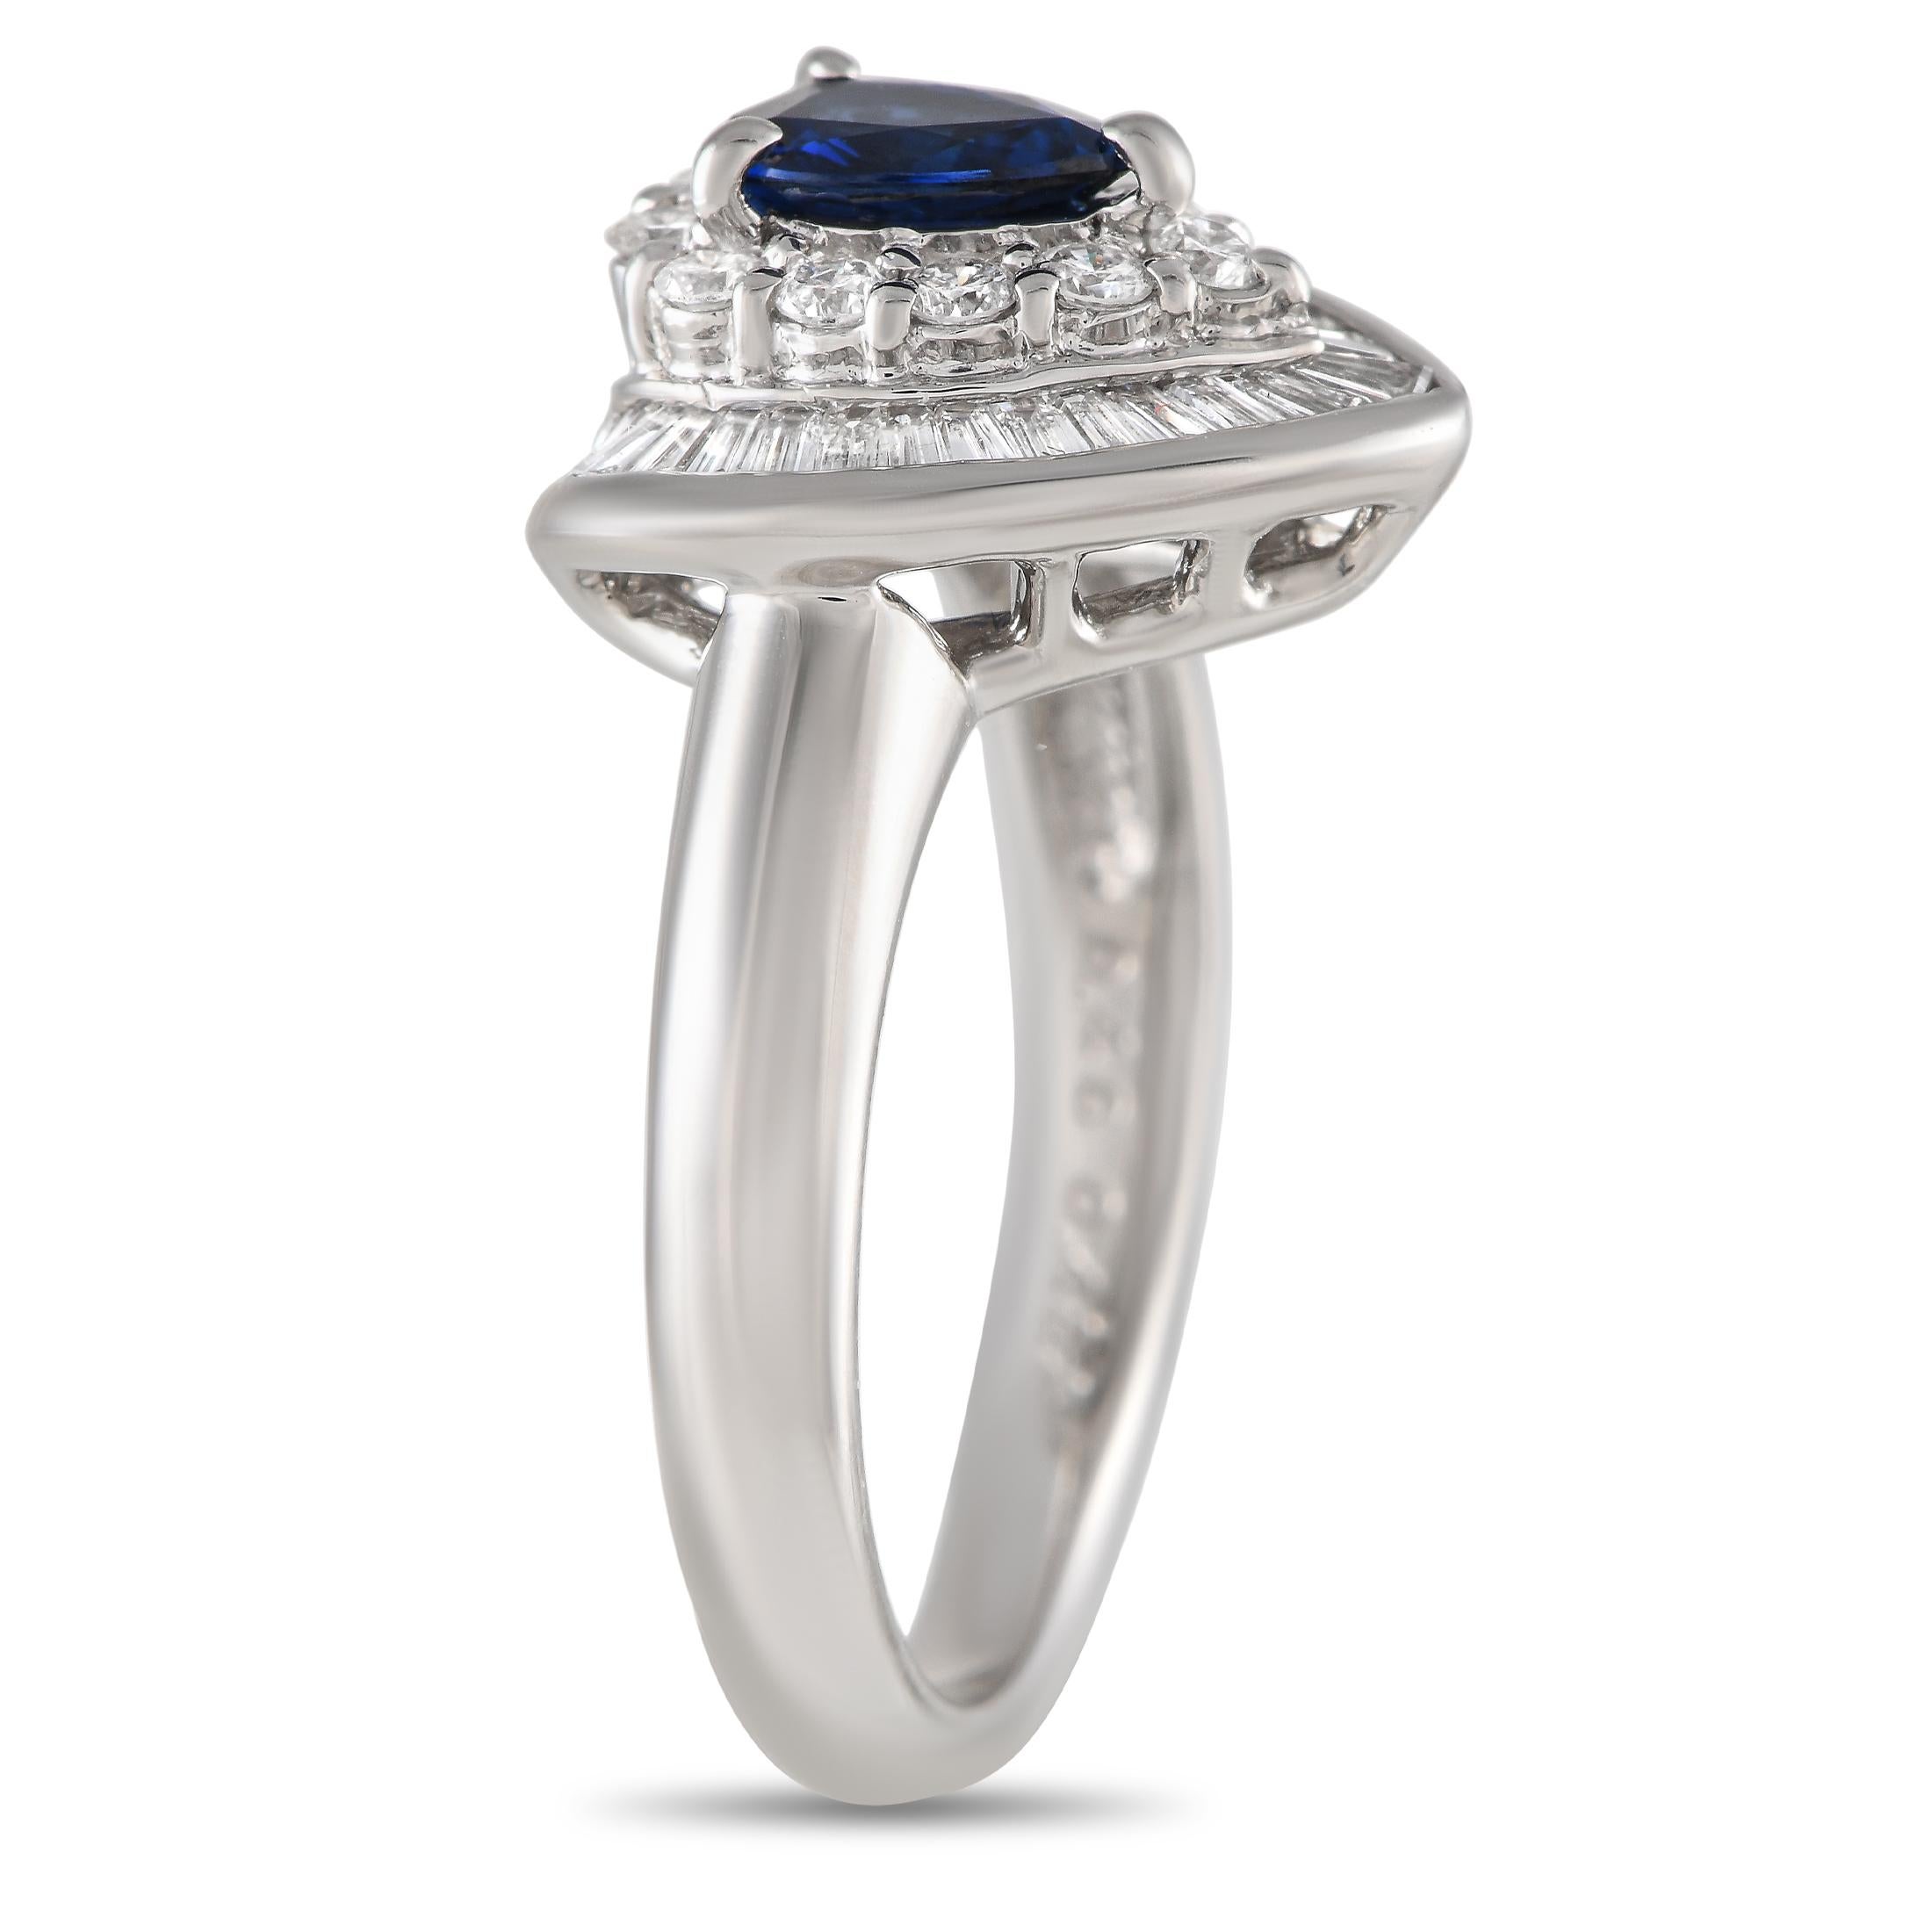 This rings dynamic platinum setting gives it a uniquely elegant point of view. Diamonds with a total weight of 0.49 carats cover the top of the design, while a 0.46 carat pear-cut sapphire adds extra luxury and visual impact. It features a 2mm wide